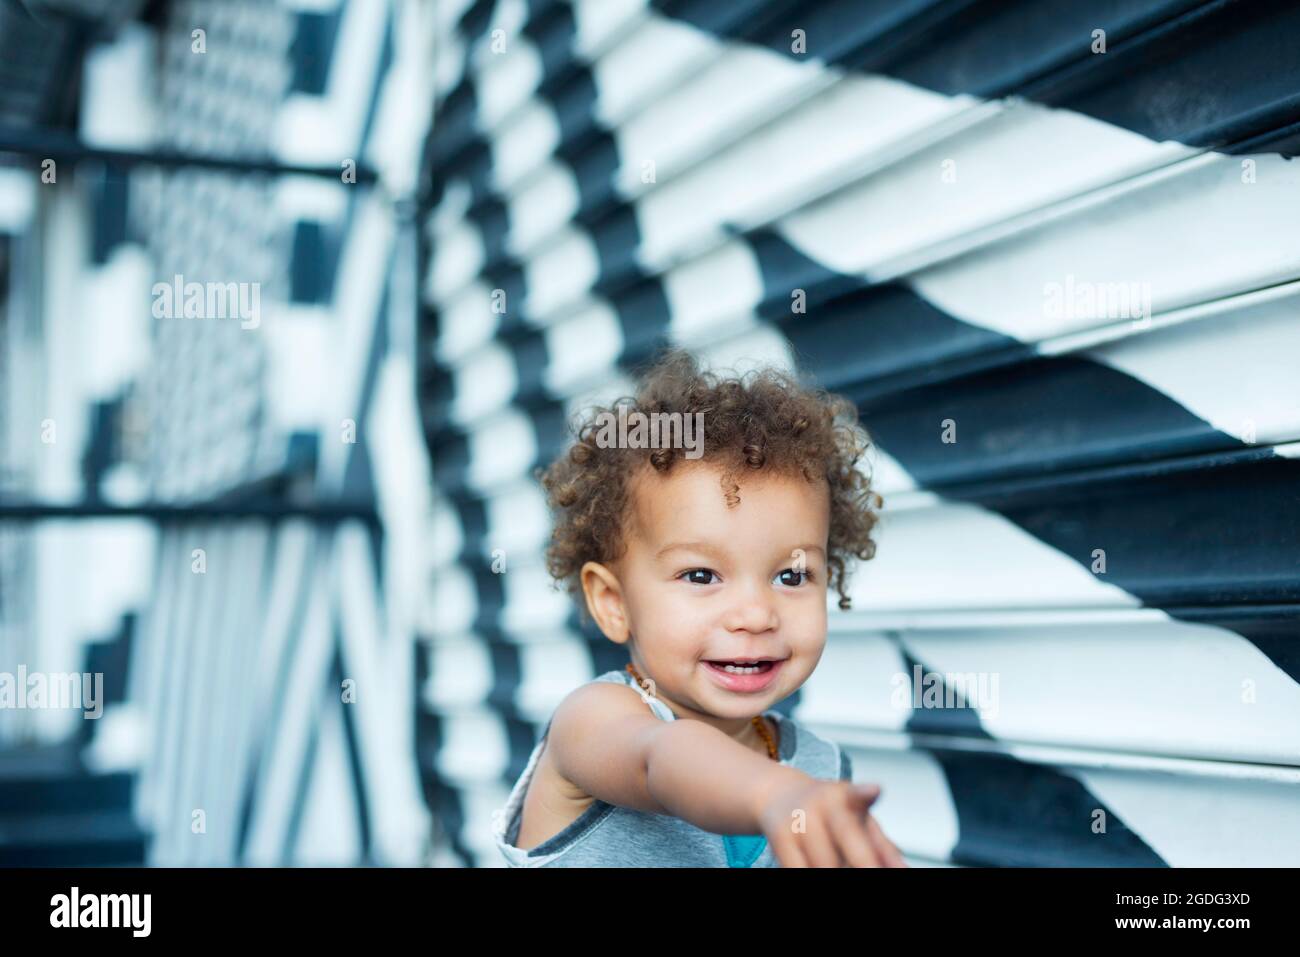 Toddler pointing, mural in background, Wynwood, Miami, Florida, USA Stock Photo